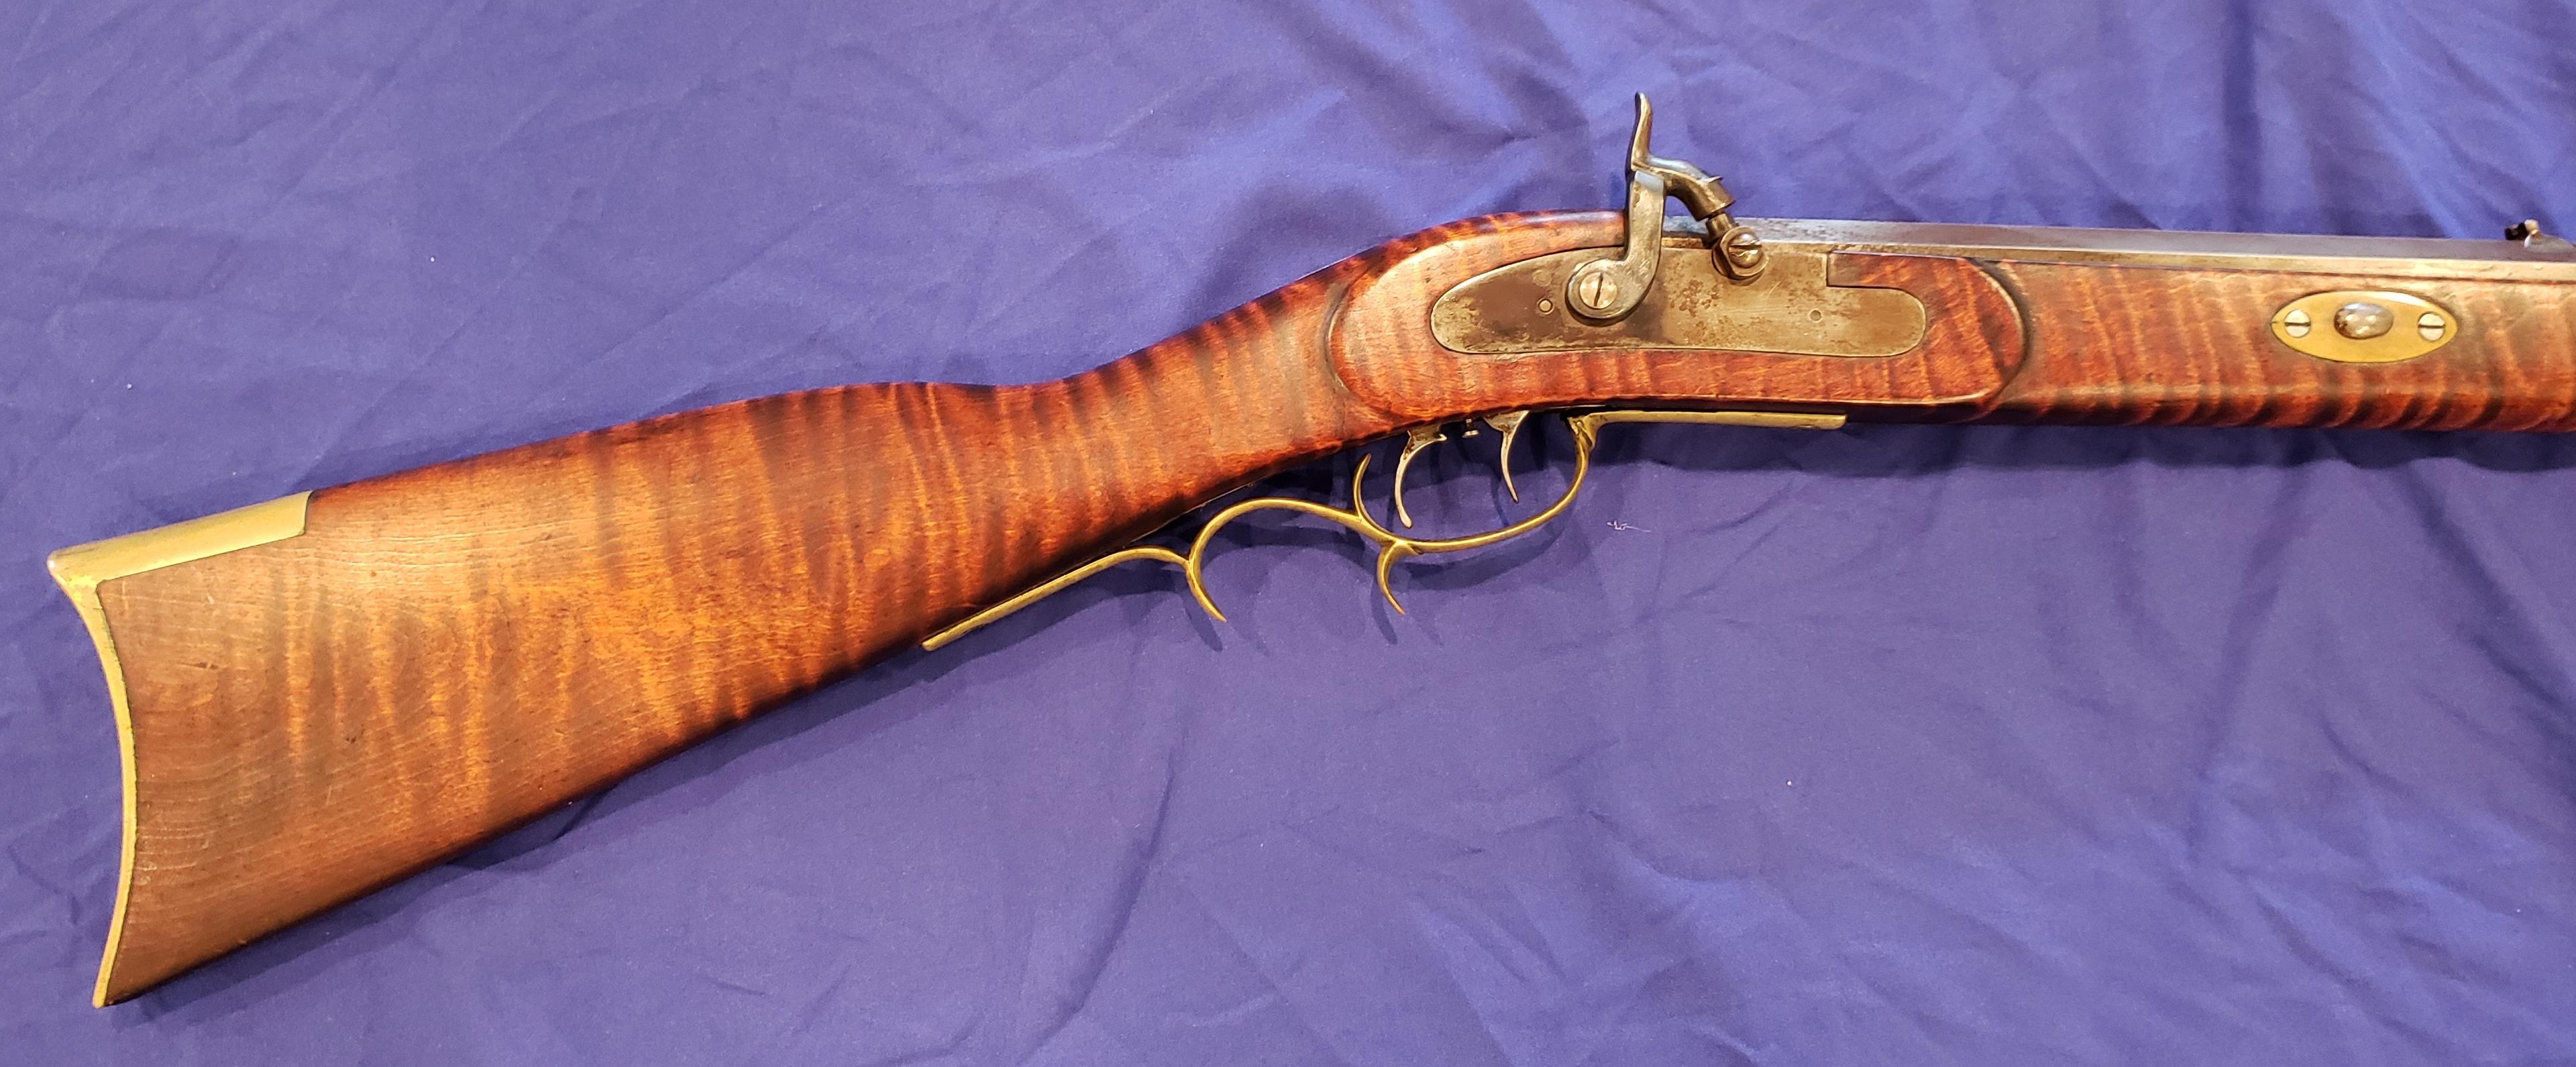 BEAUTIFUL MUZZLE LOADER, UNKNOWN MFR AND CALIBER